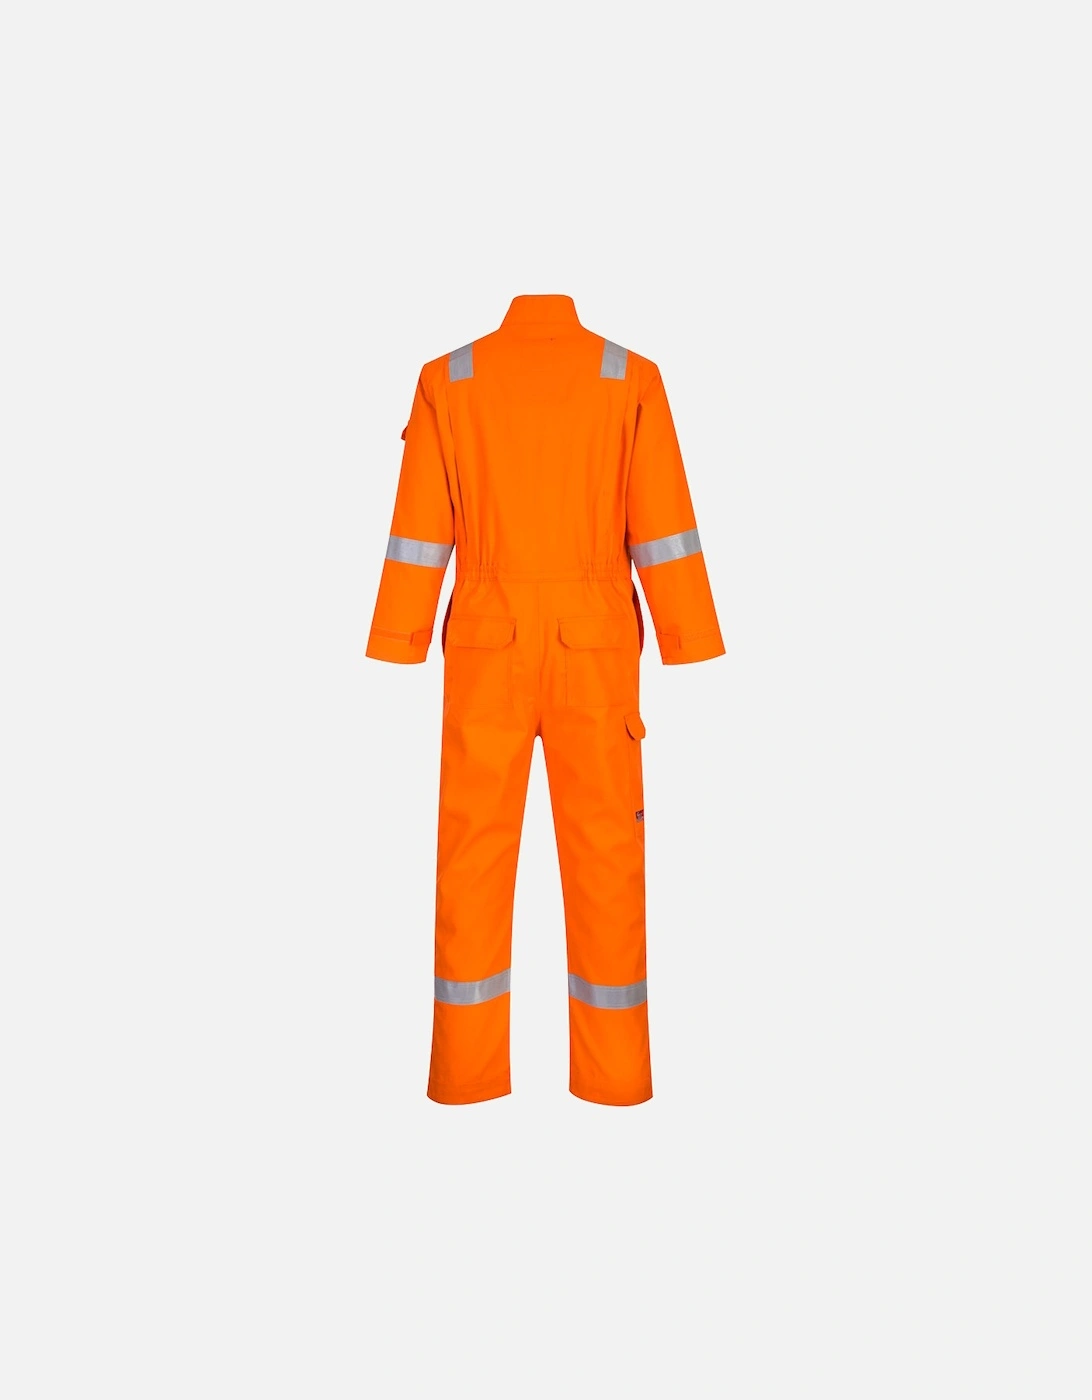 Mens Bizflame Flame Resistant Work Overall/Coverall